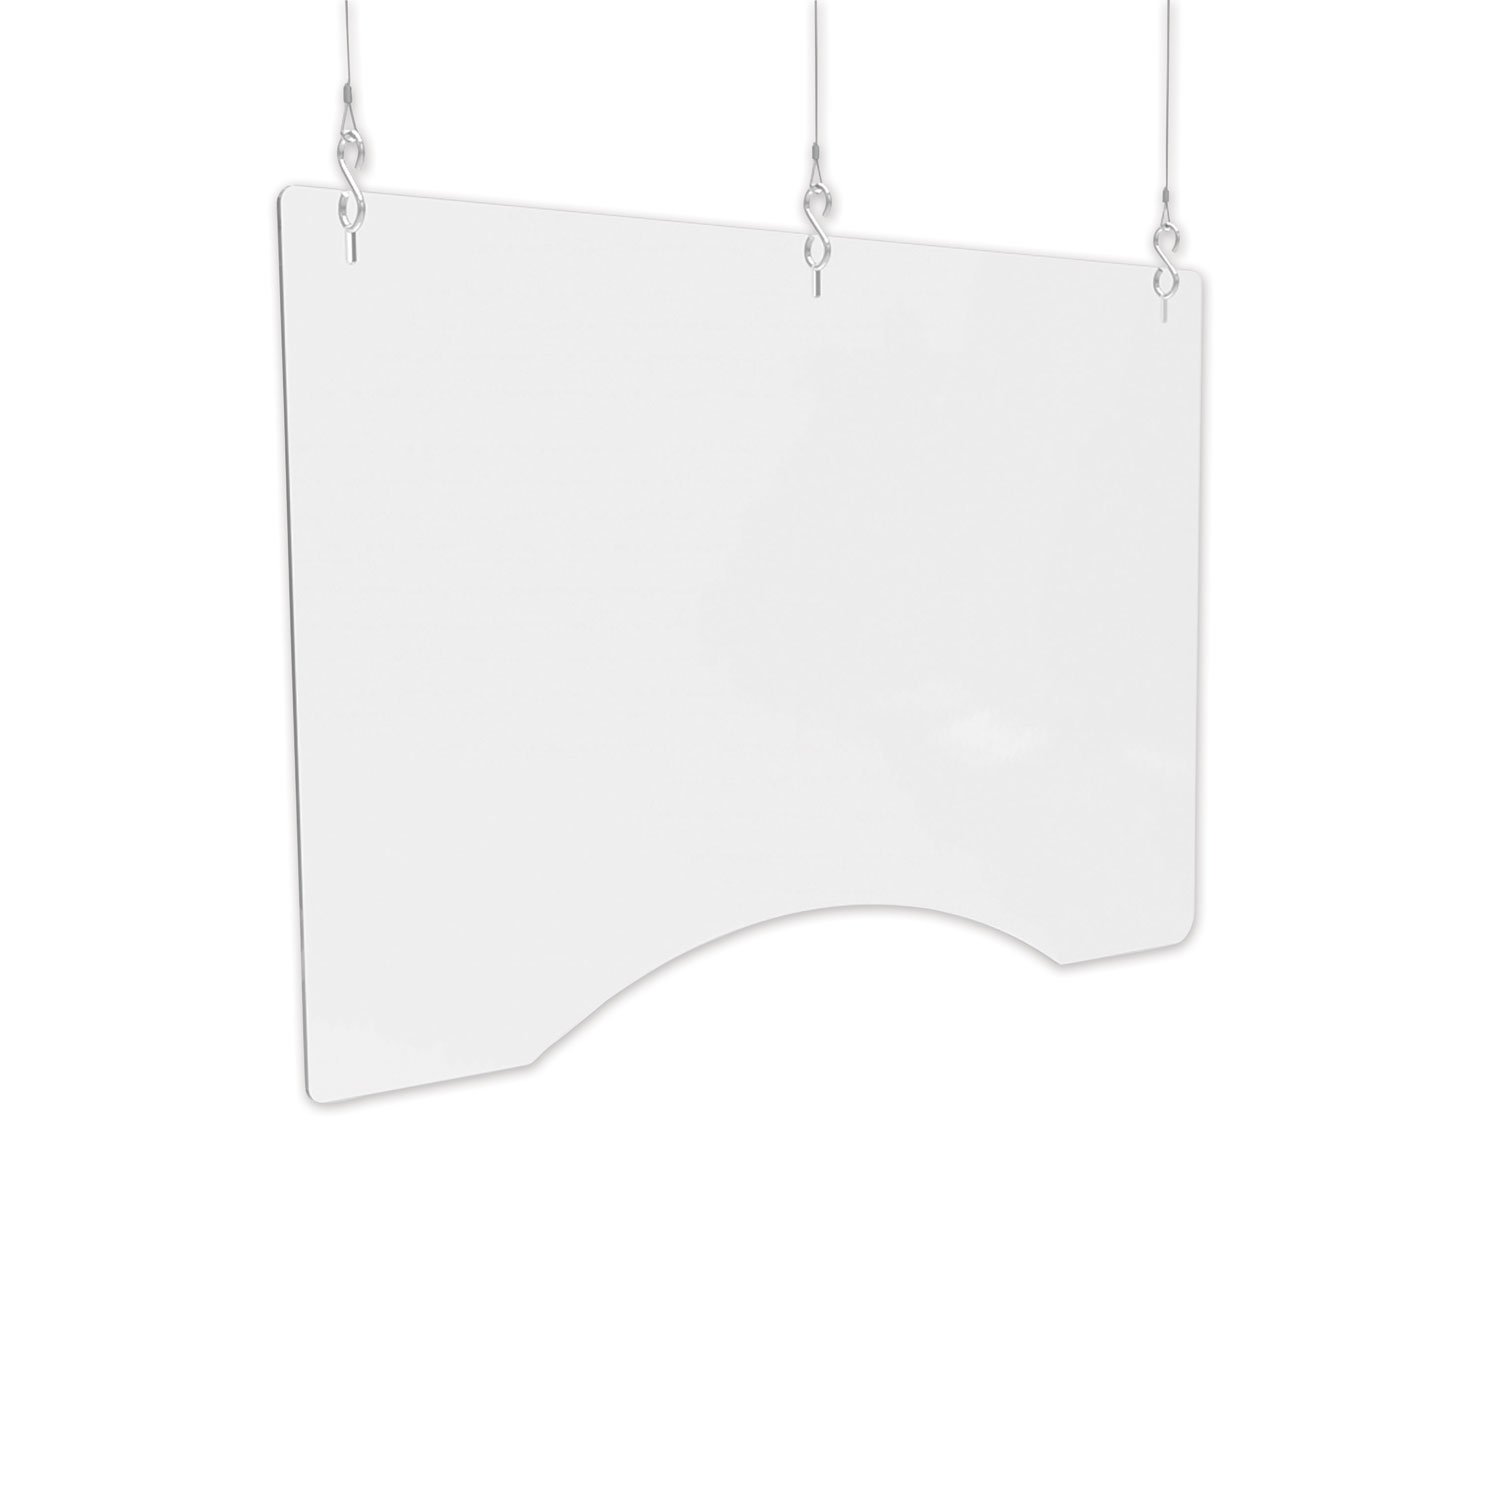  deflecto PBCHPC3624 Hanging Barrier, 36 x 24, Polycarbonate, Clear, 2/Carton (DEFPBCHPC3624) 